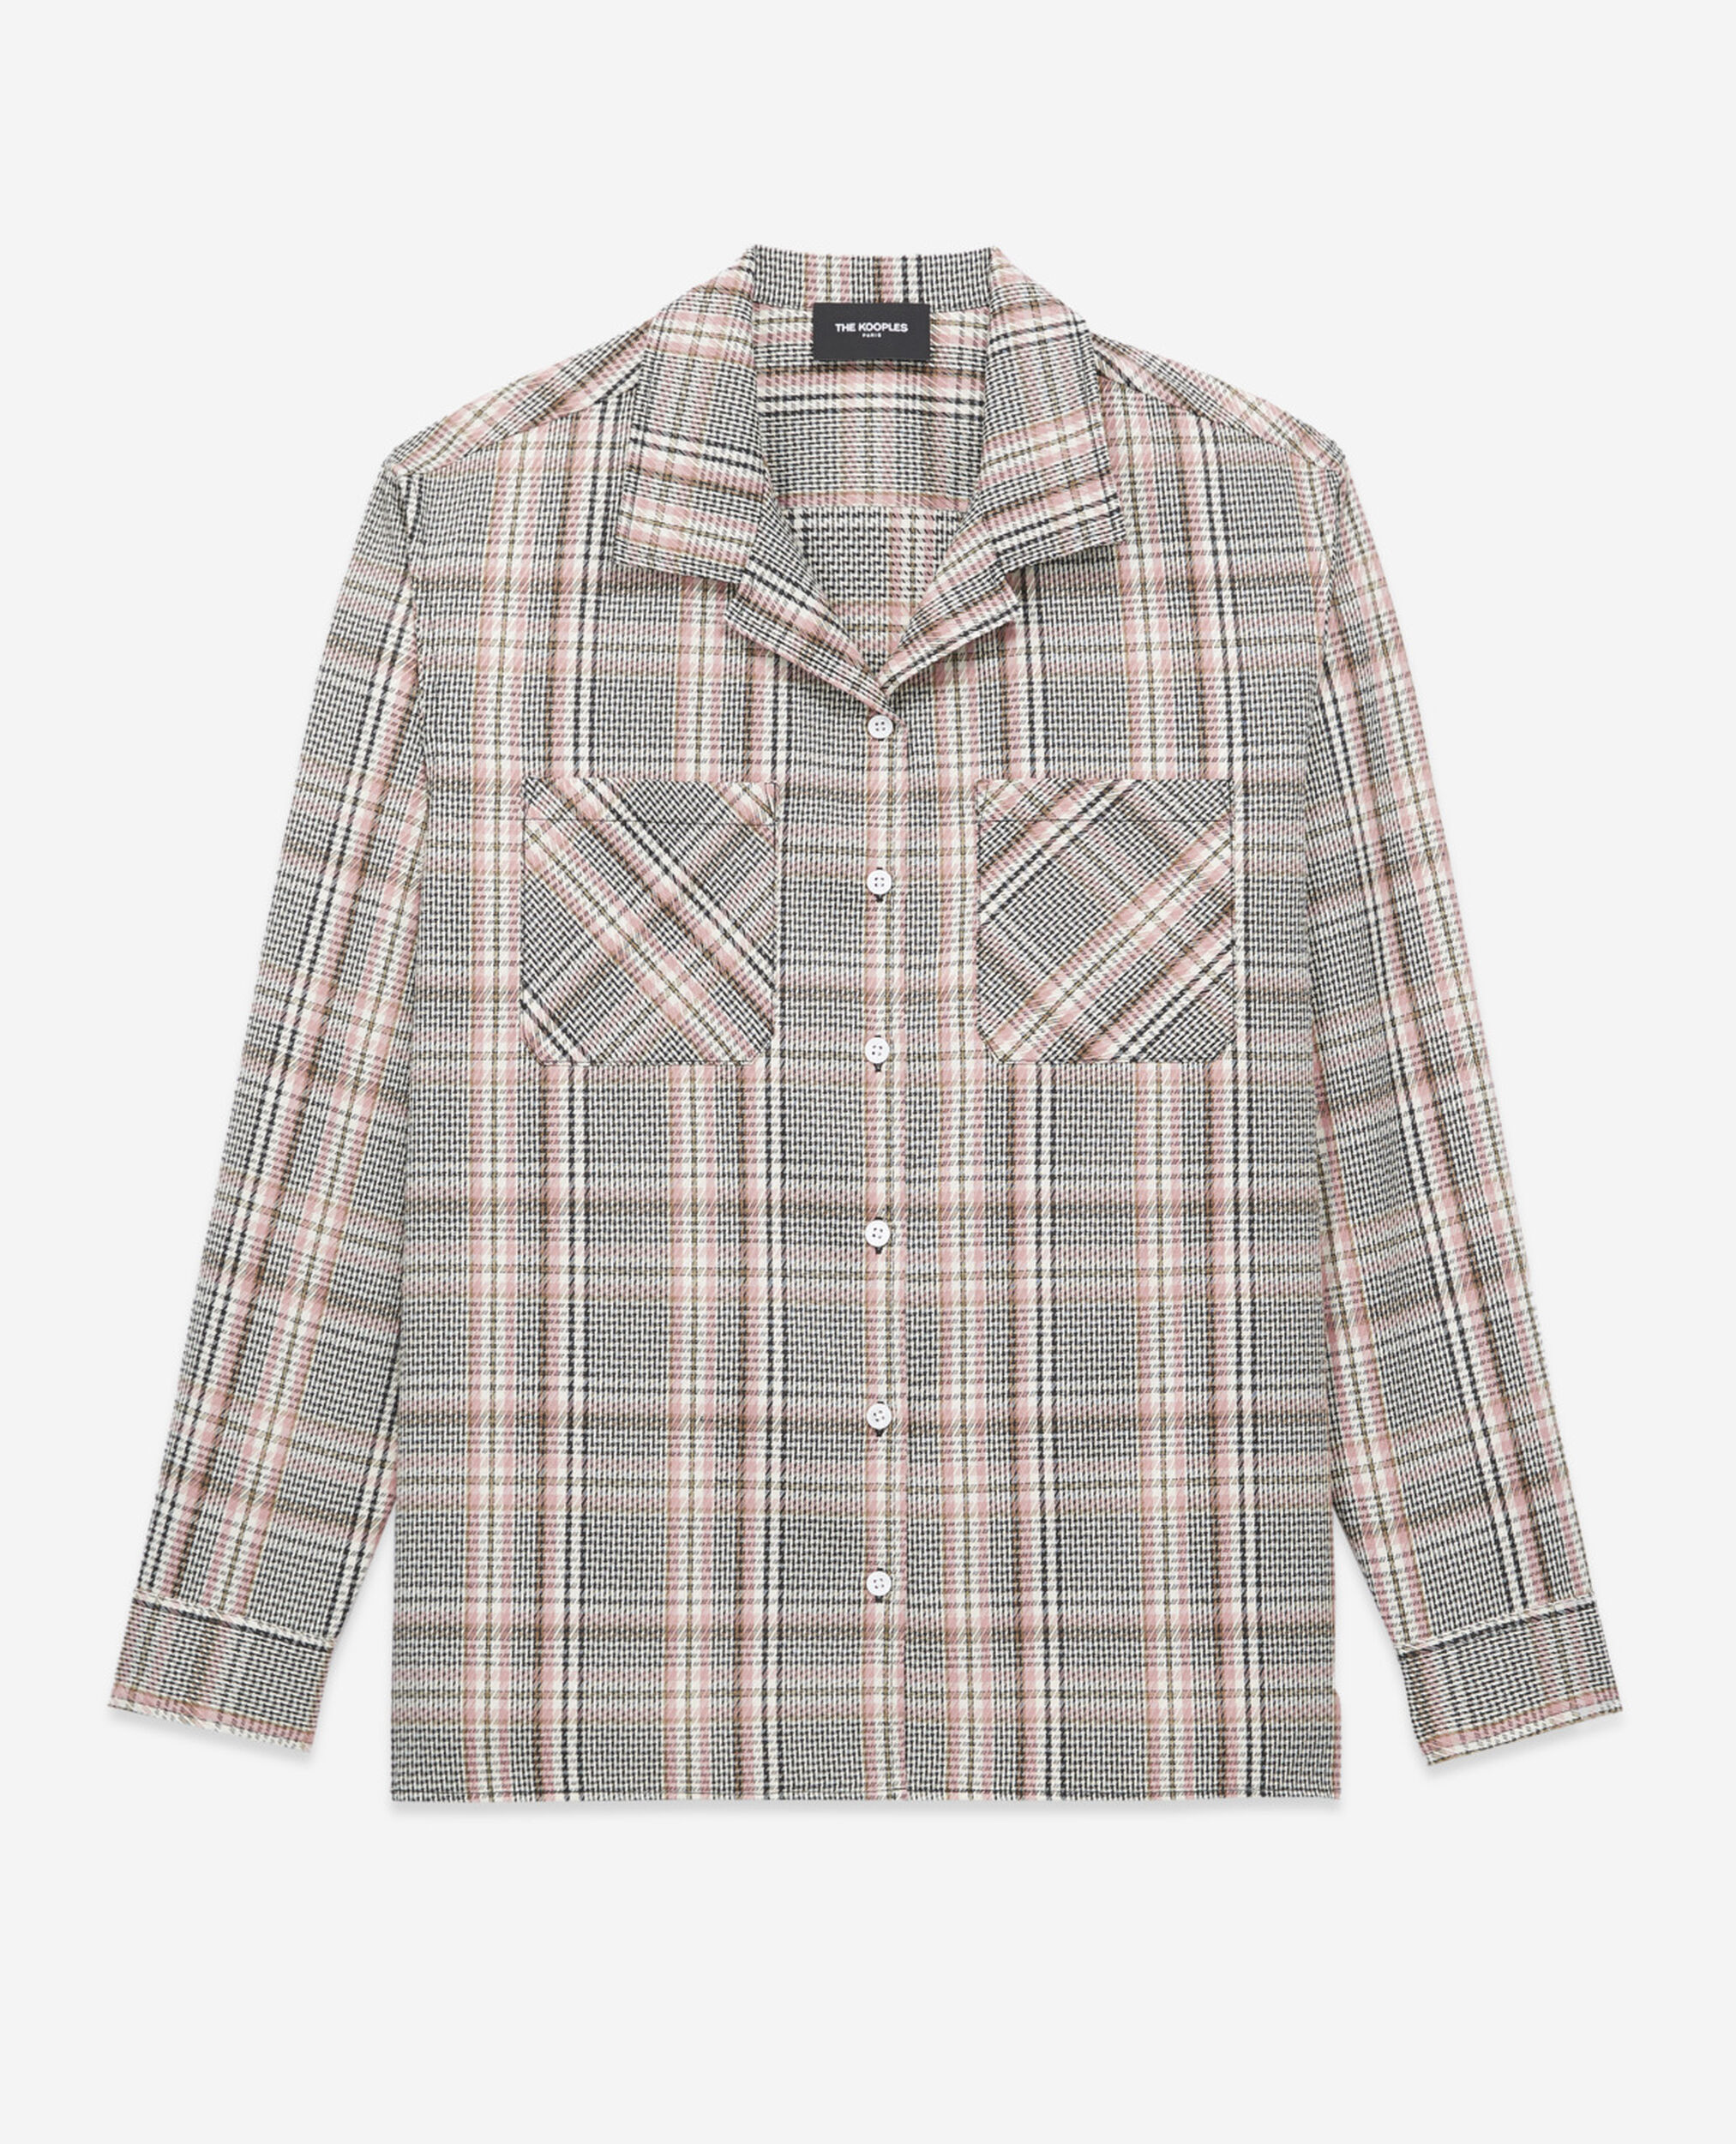 Women’s pink - black oversized checked shirt, PINK, hi-res image number null